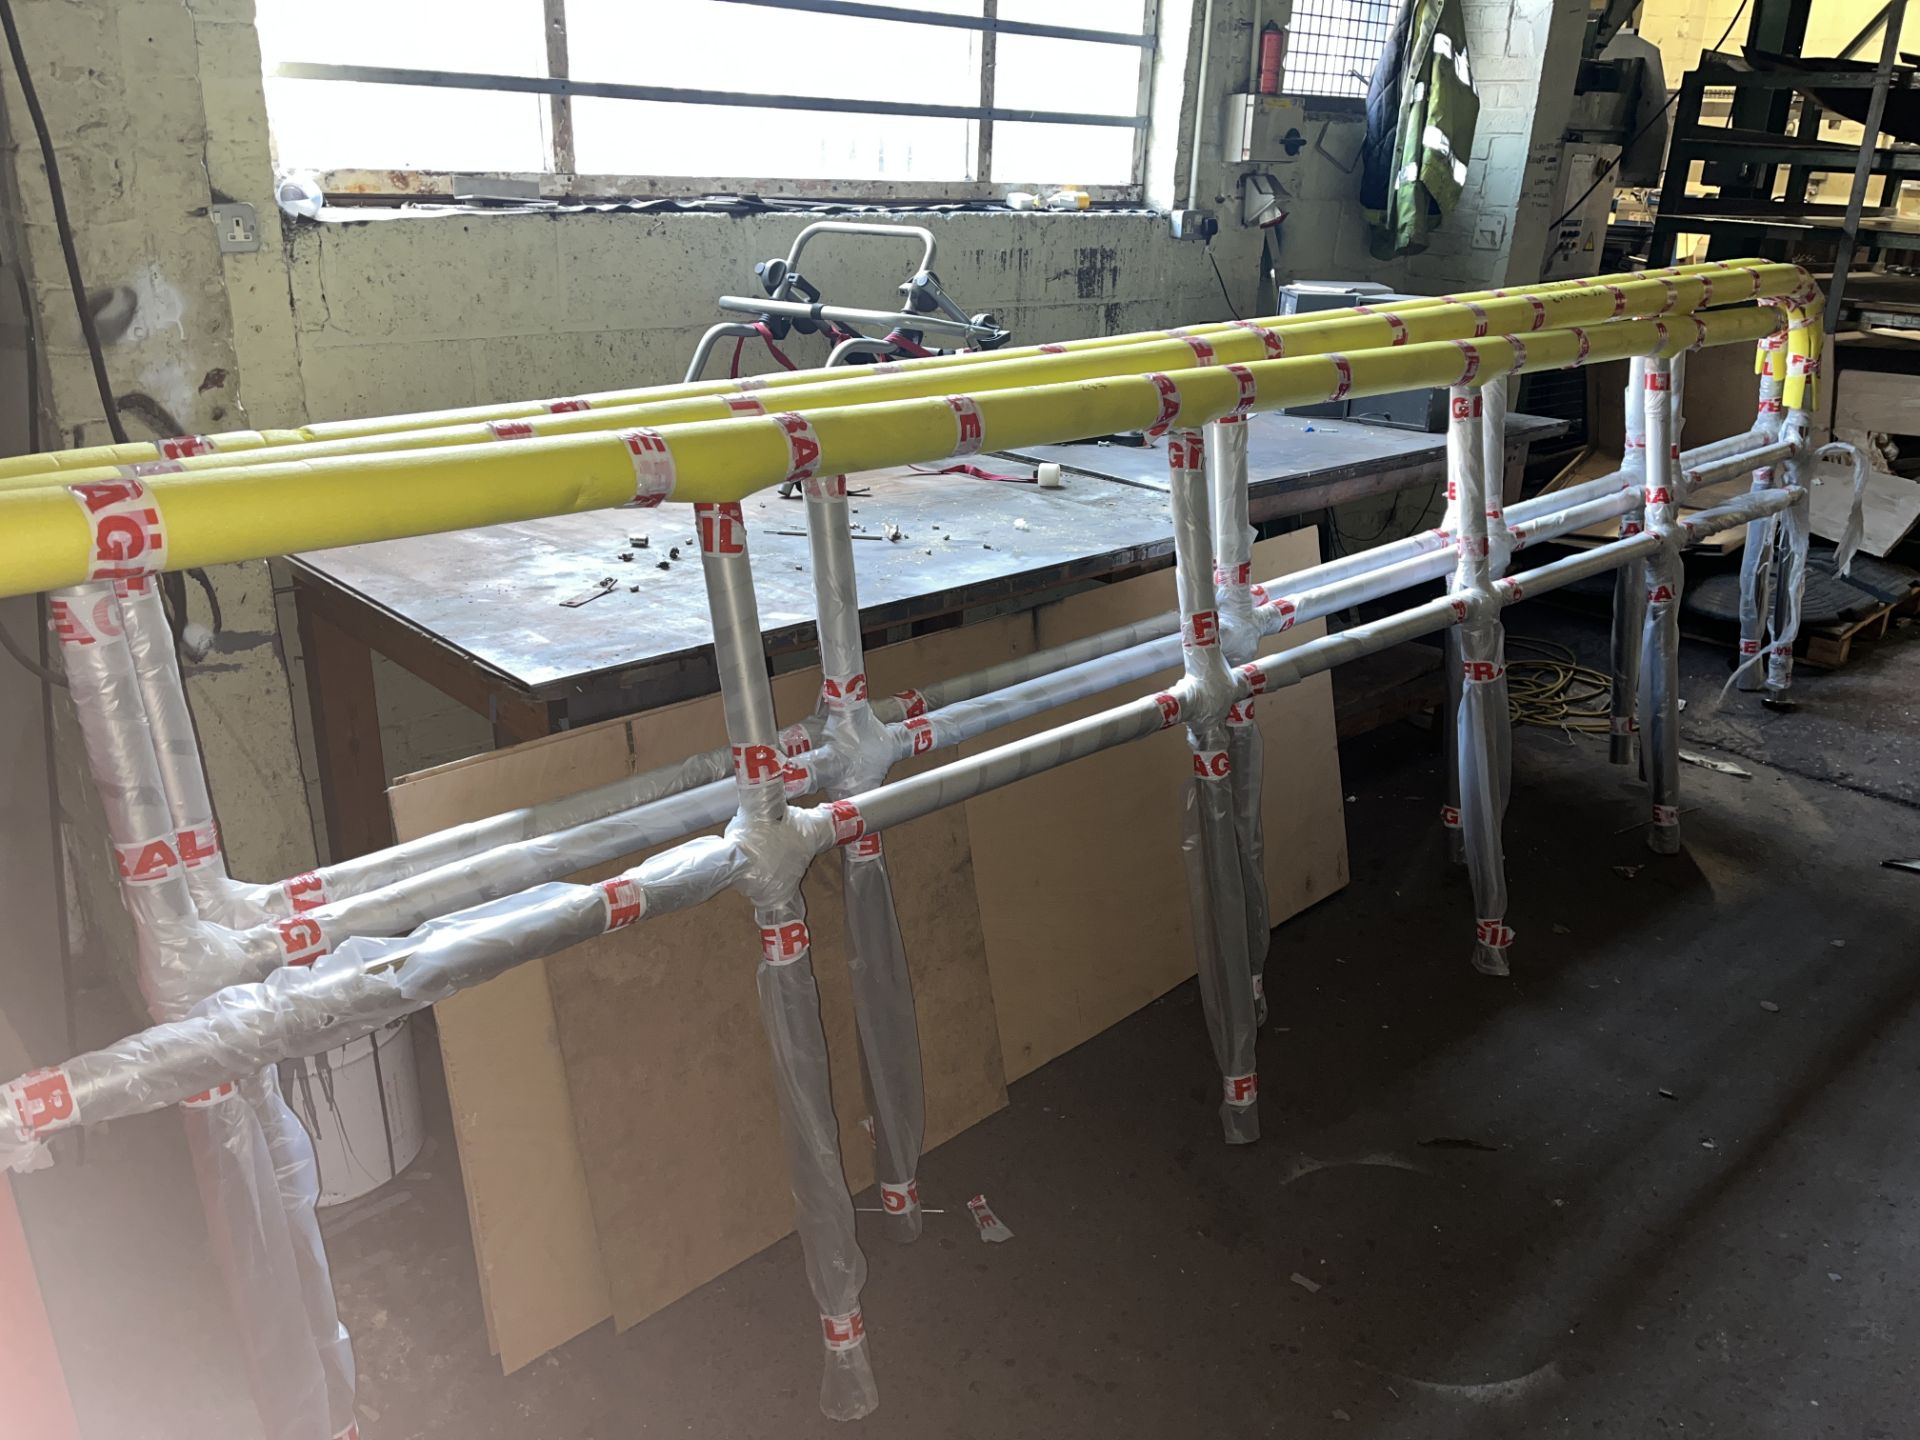 BRAND NEW STAINLESS STEEL RAILINGS IN 3 PIECES. SIZE APPROX: 3 SECTIONS ADDING UP TO 12.2M LONG (